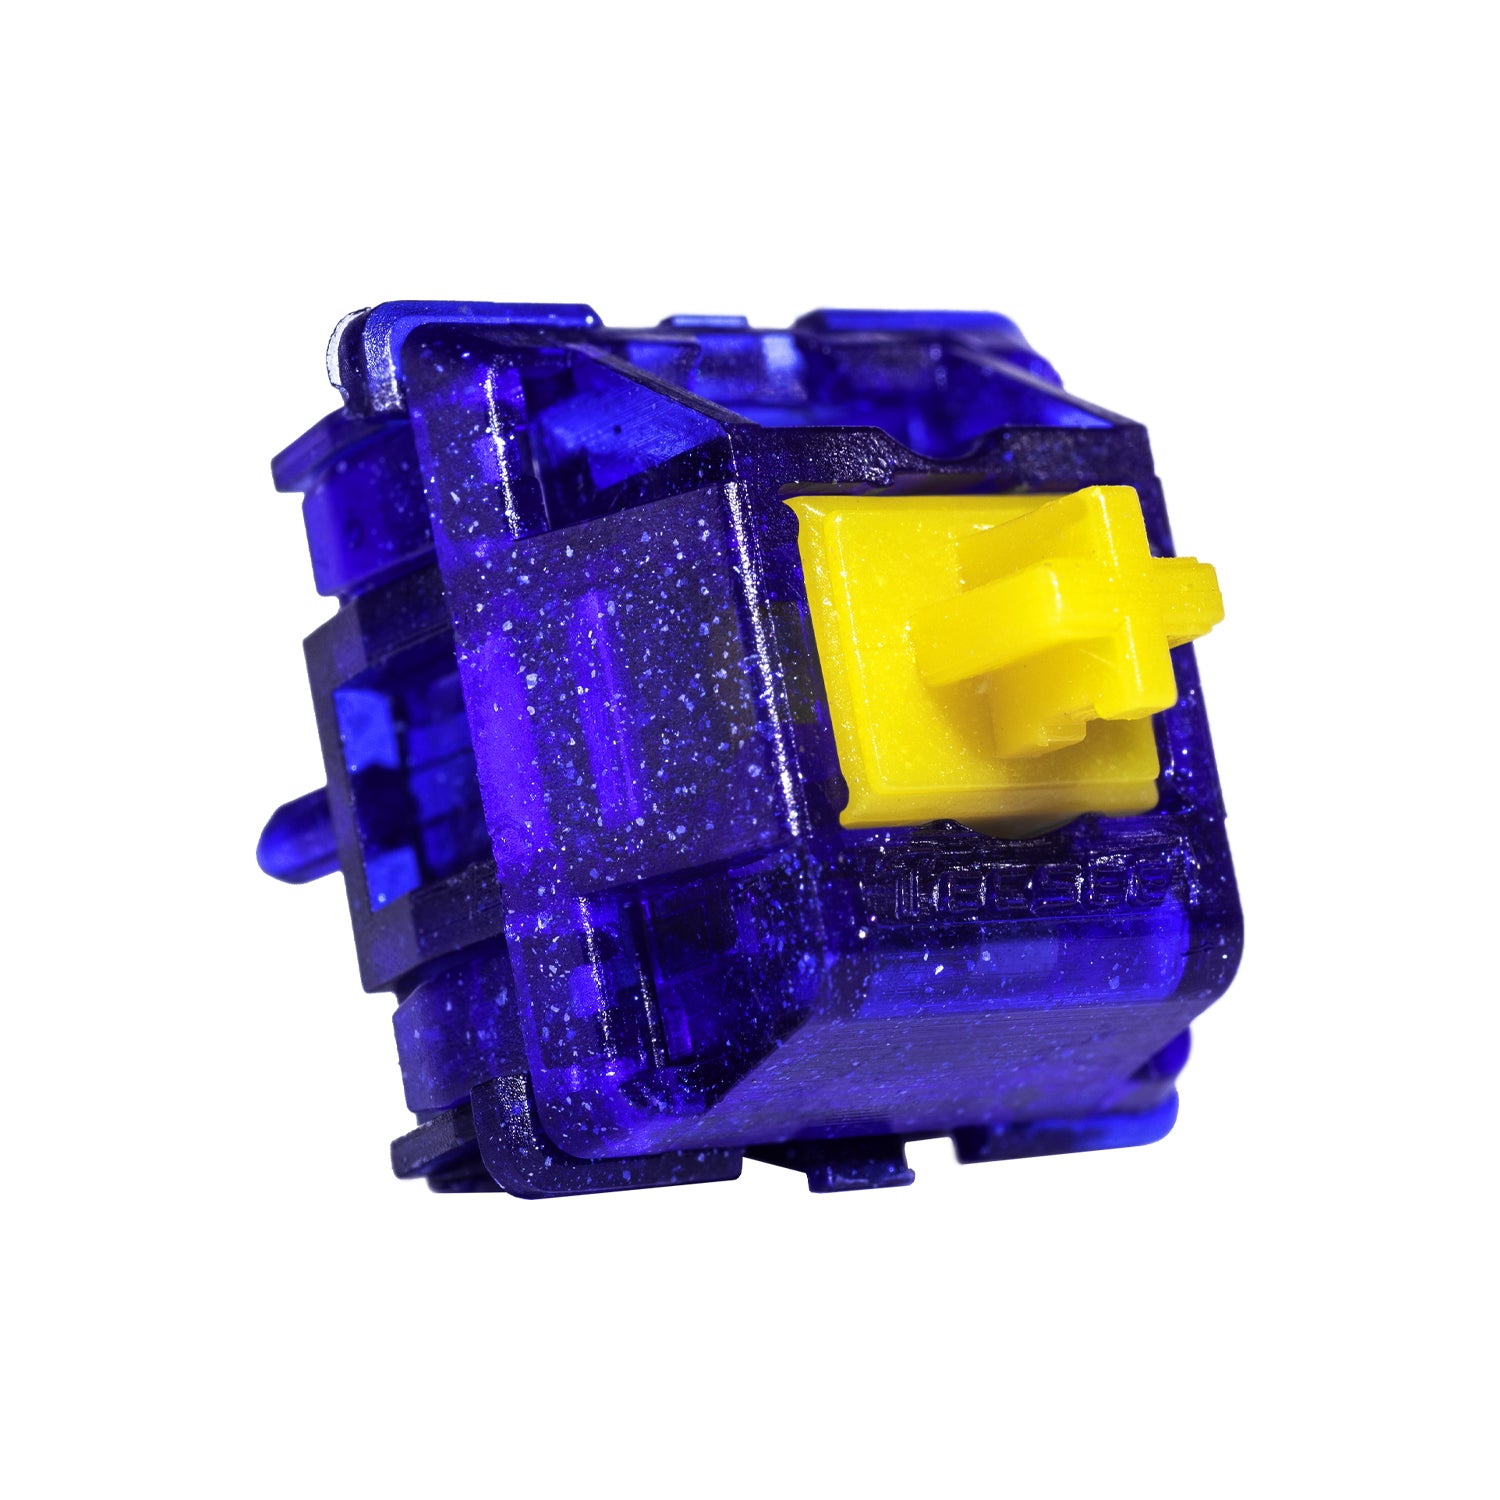 Tecsee Sapphire V2 Tactile Switches | Mecha Store